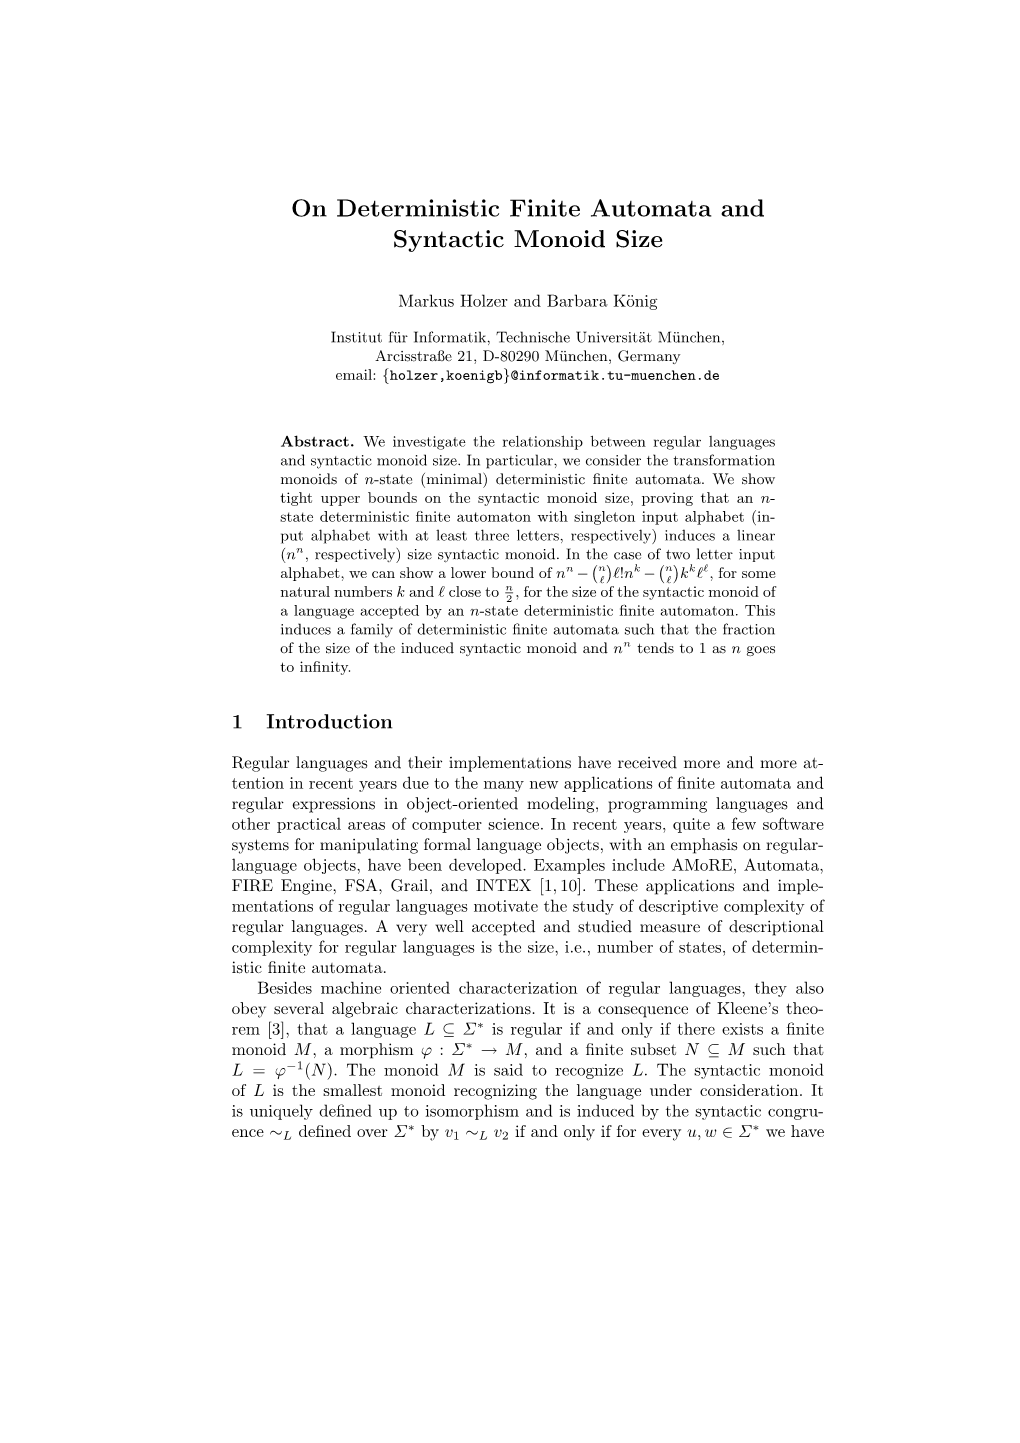 On Deterministic Finite Automata and Syntactic Monoid Size